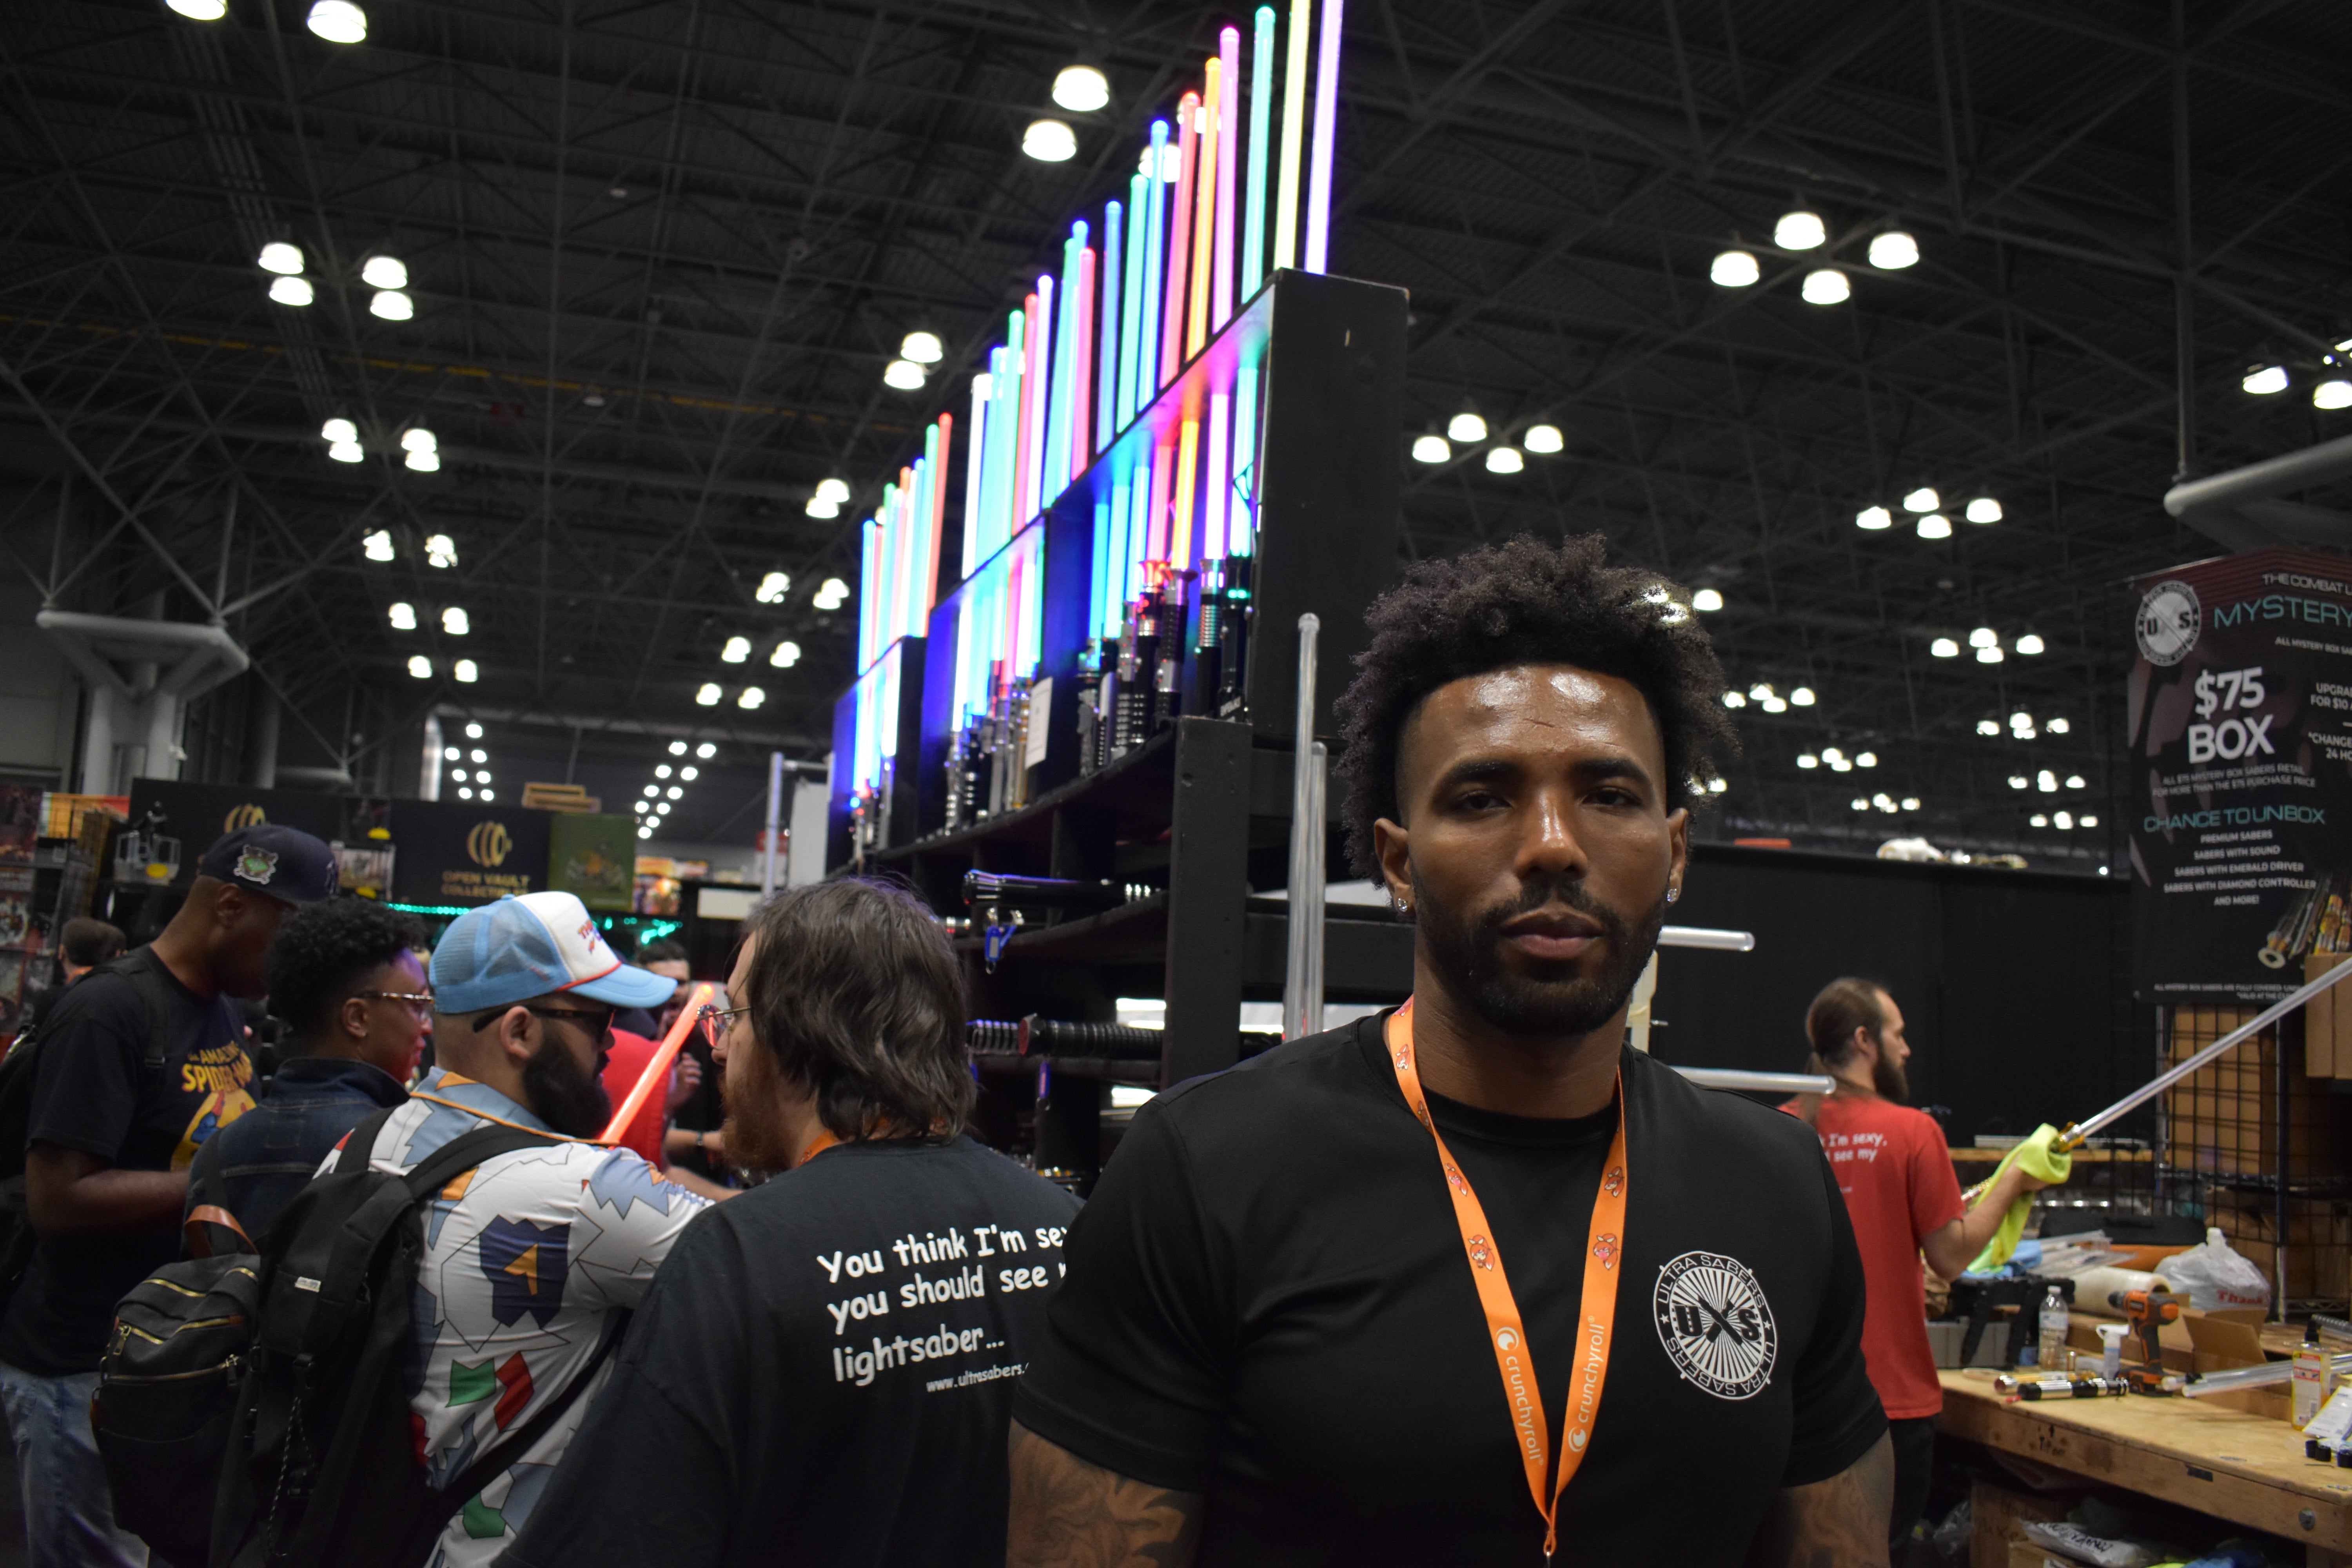 Emory Harris, the owner of Ultrasabers, stands in front of the busy booth at New York Comic Con. (Photo: Kyle Barr/io9)